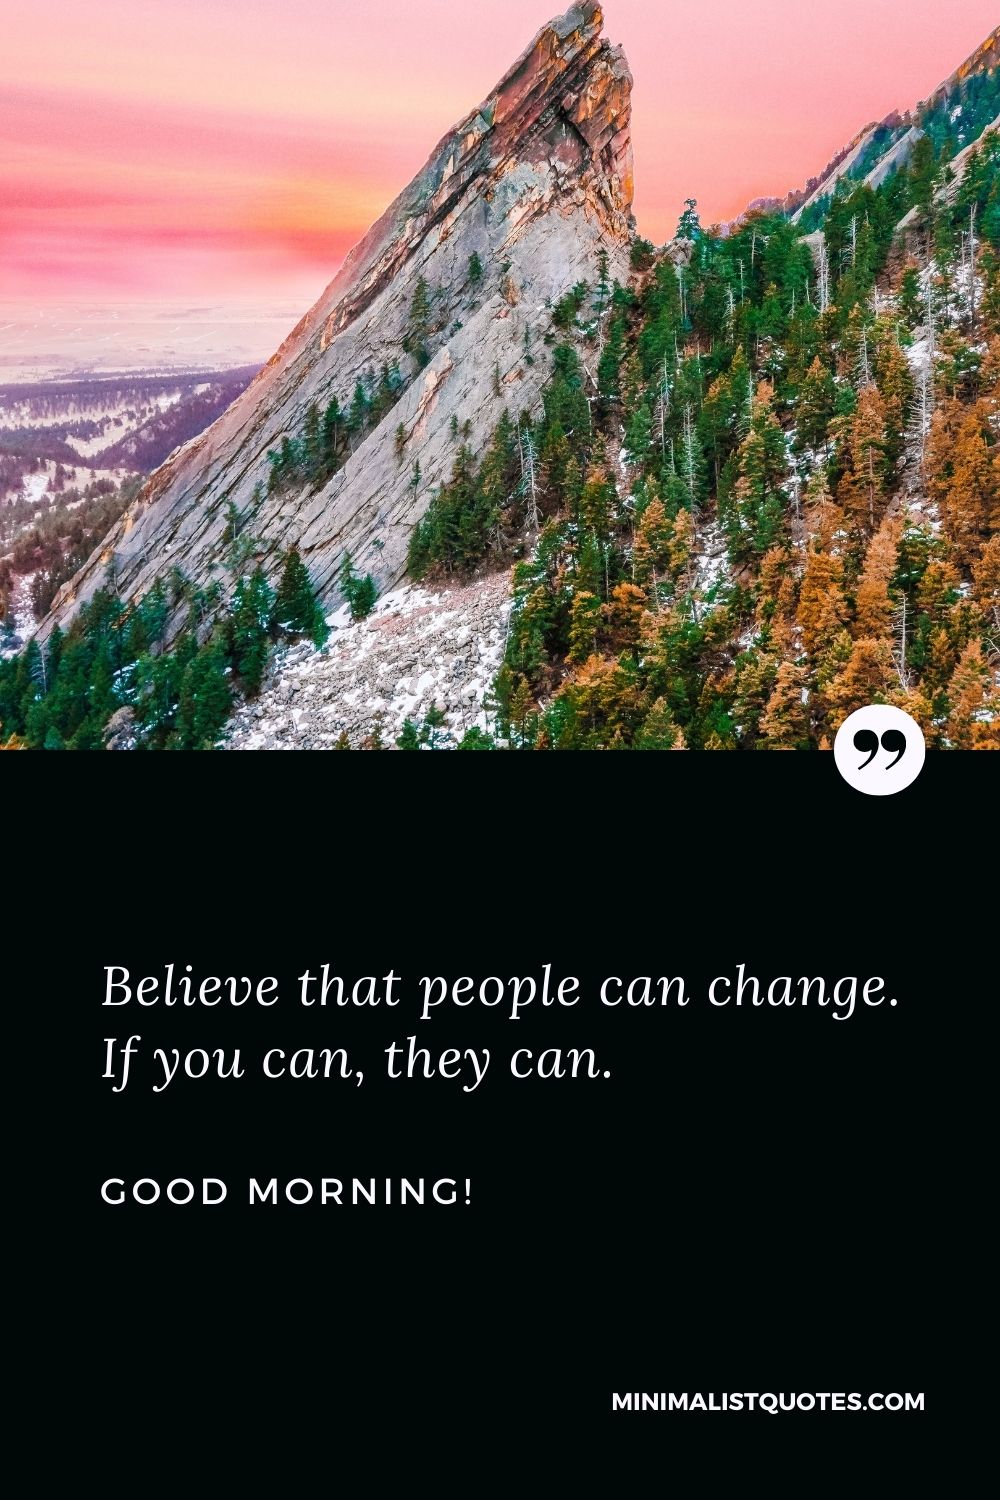 Believe that people can change. If you can, they can. Good Morning!